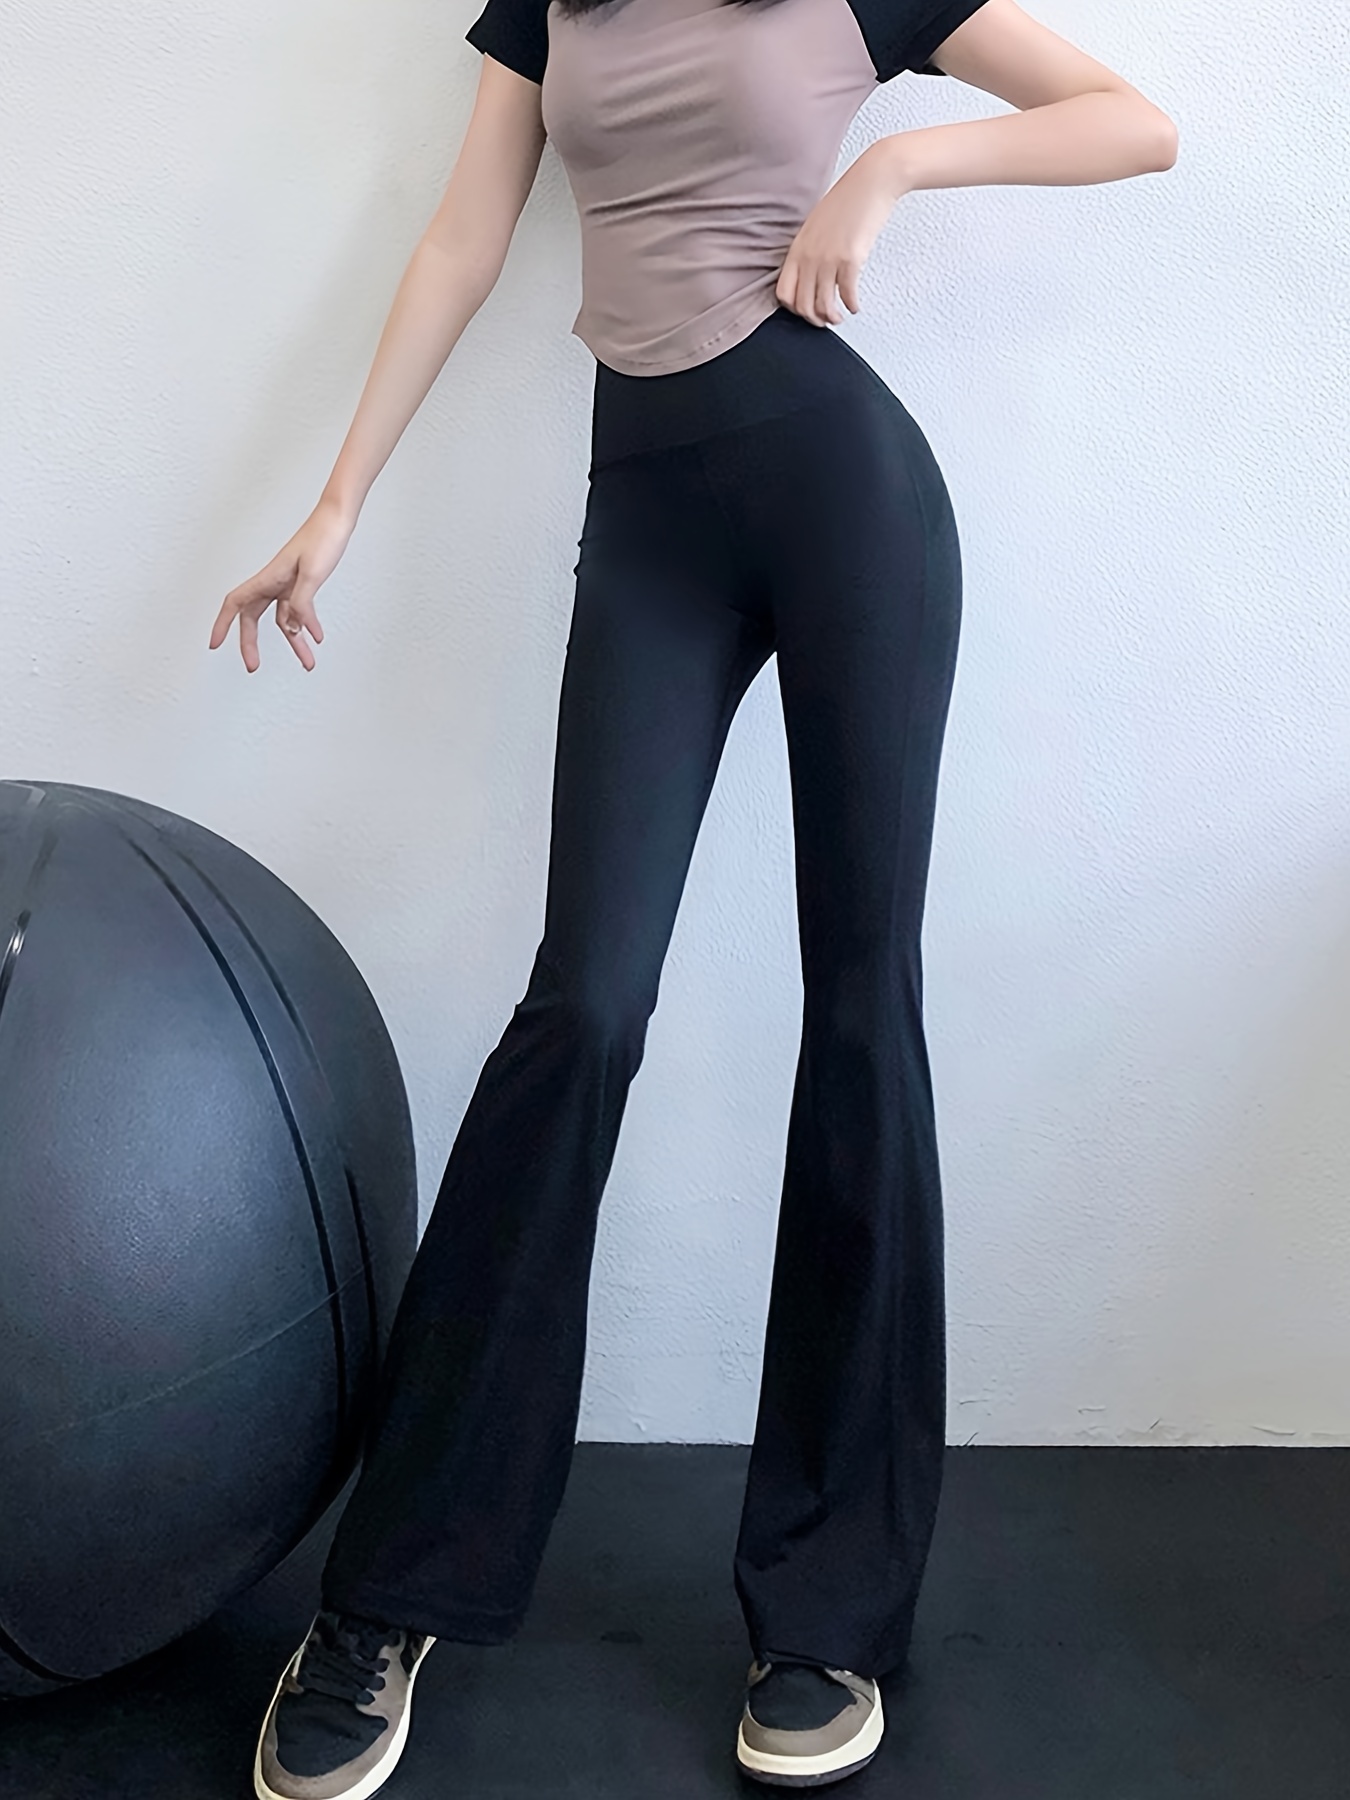 Women's Activewear: Black Tummy Control Bell Bottom Pants - Butt Lifting &  Stretchy Yoga Casual Flared Pants